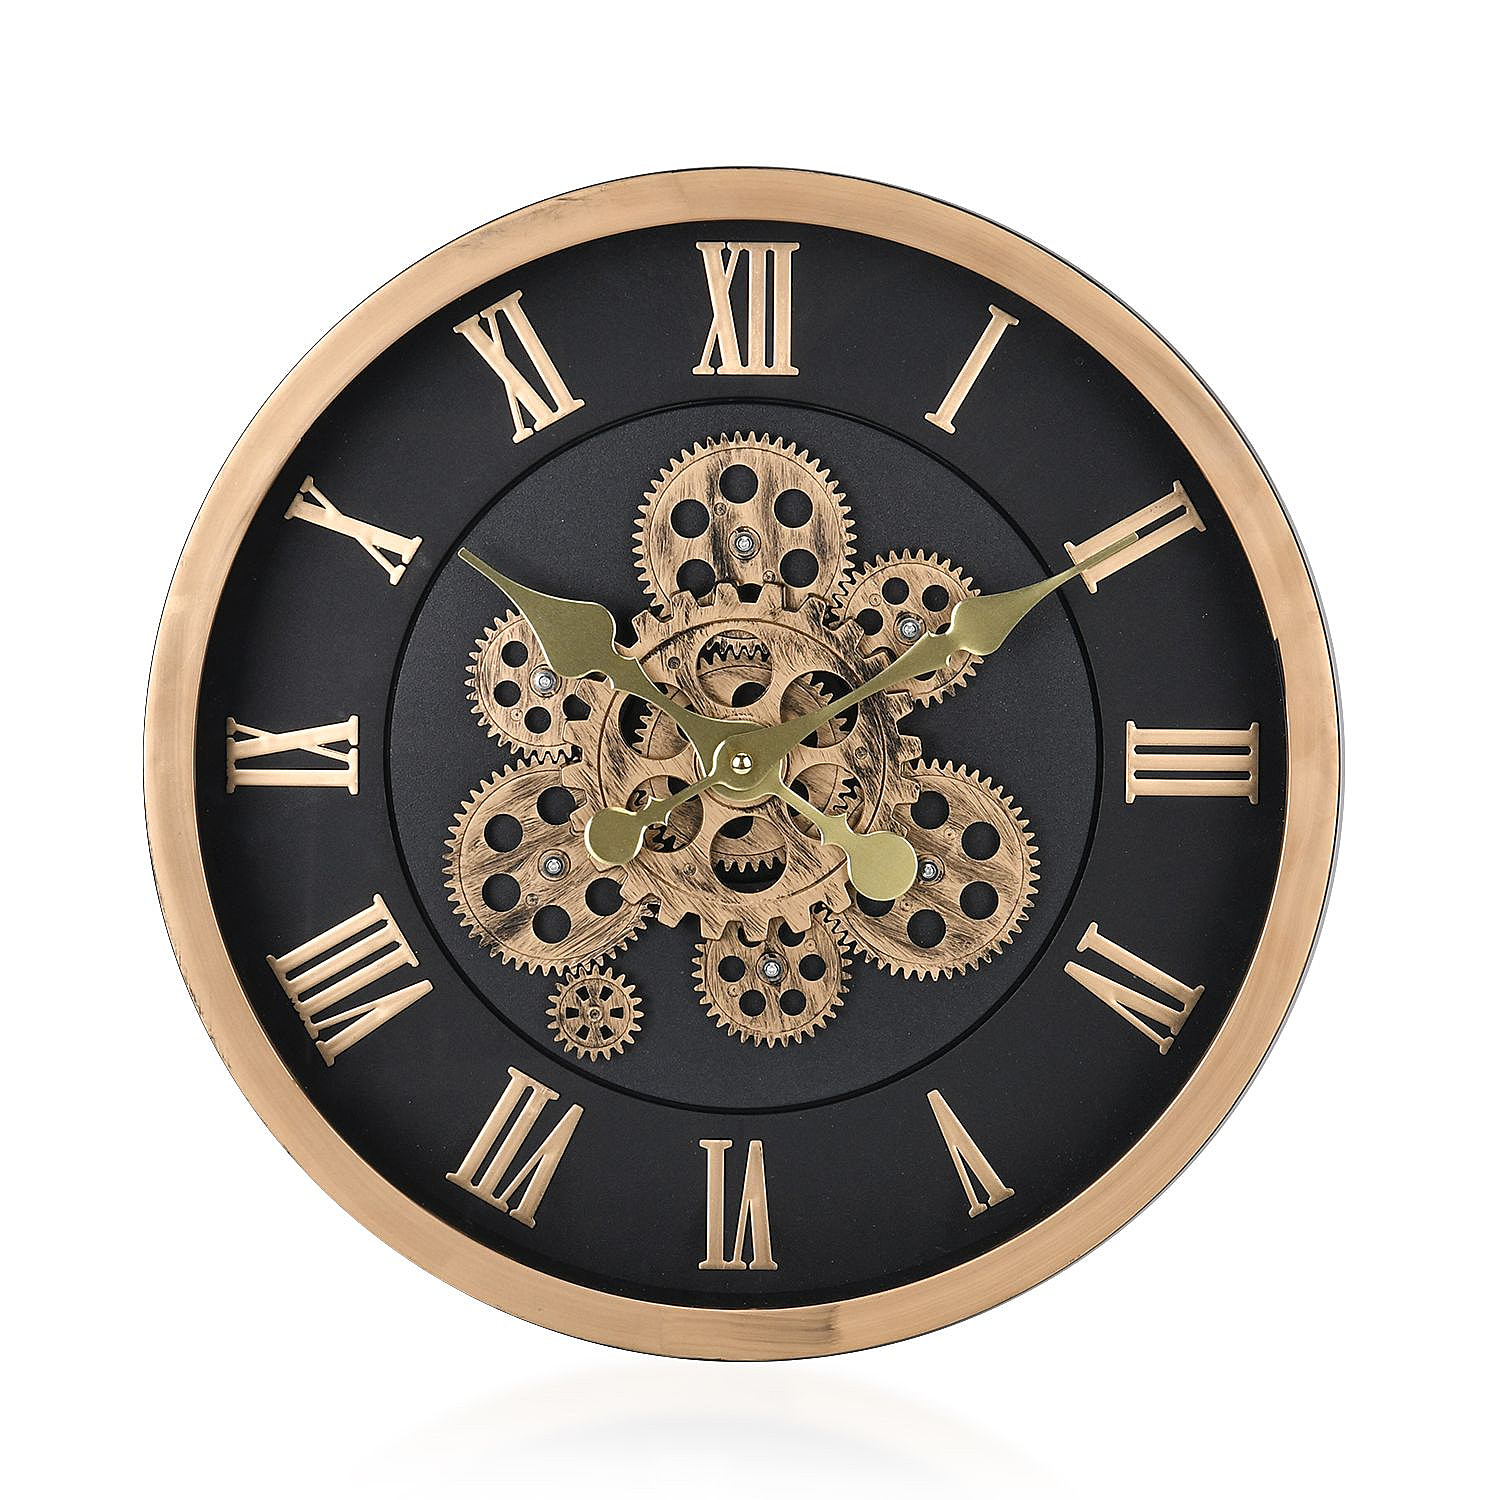 Lsrge Vintage Turning Gears Wall Clock with Large Roman Numerals (Size 40 cm) - Black